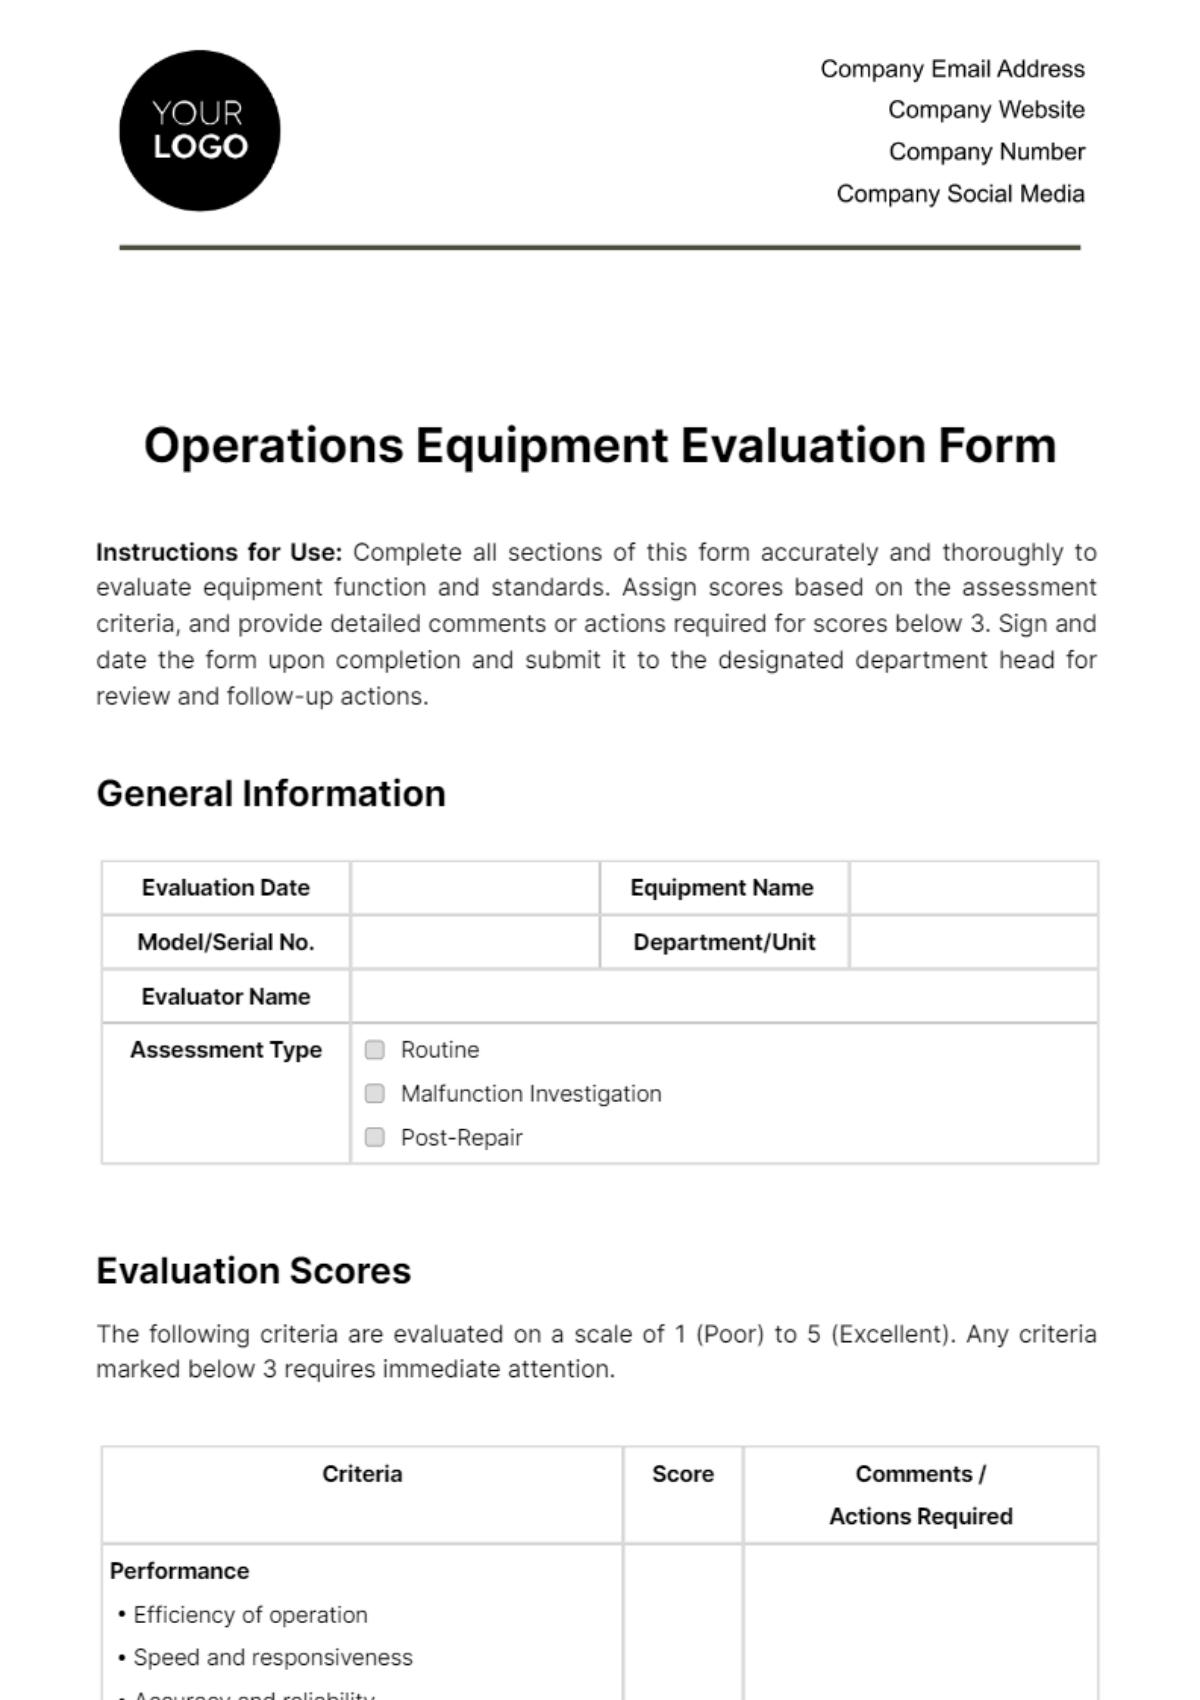 Operations Equipment Evaluation Form Template